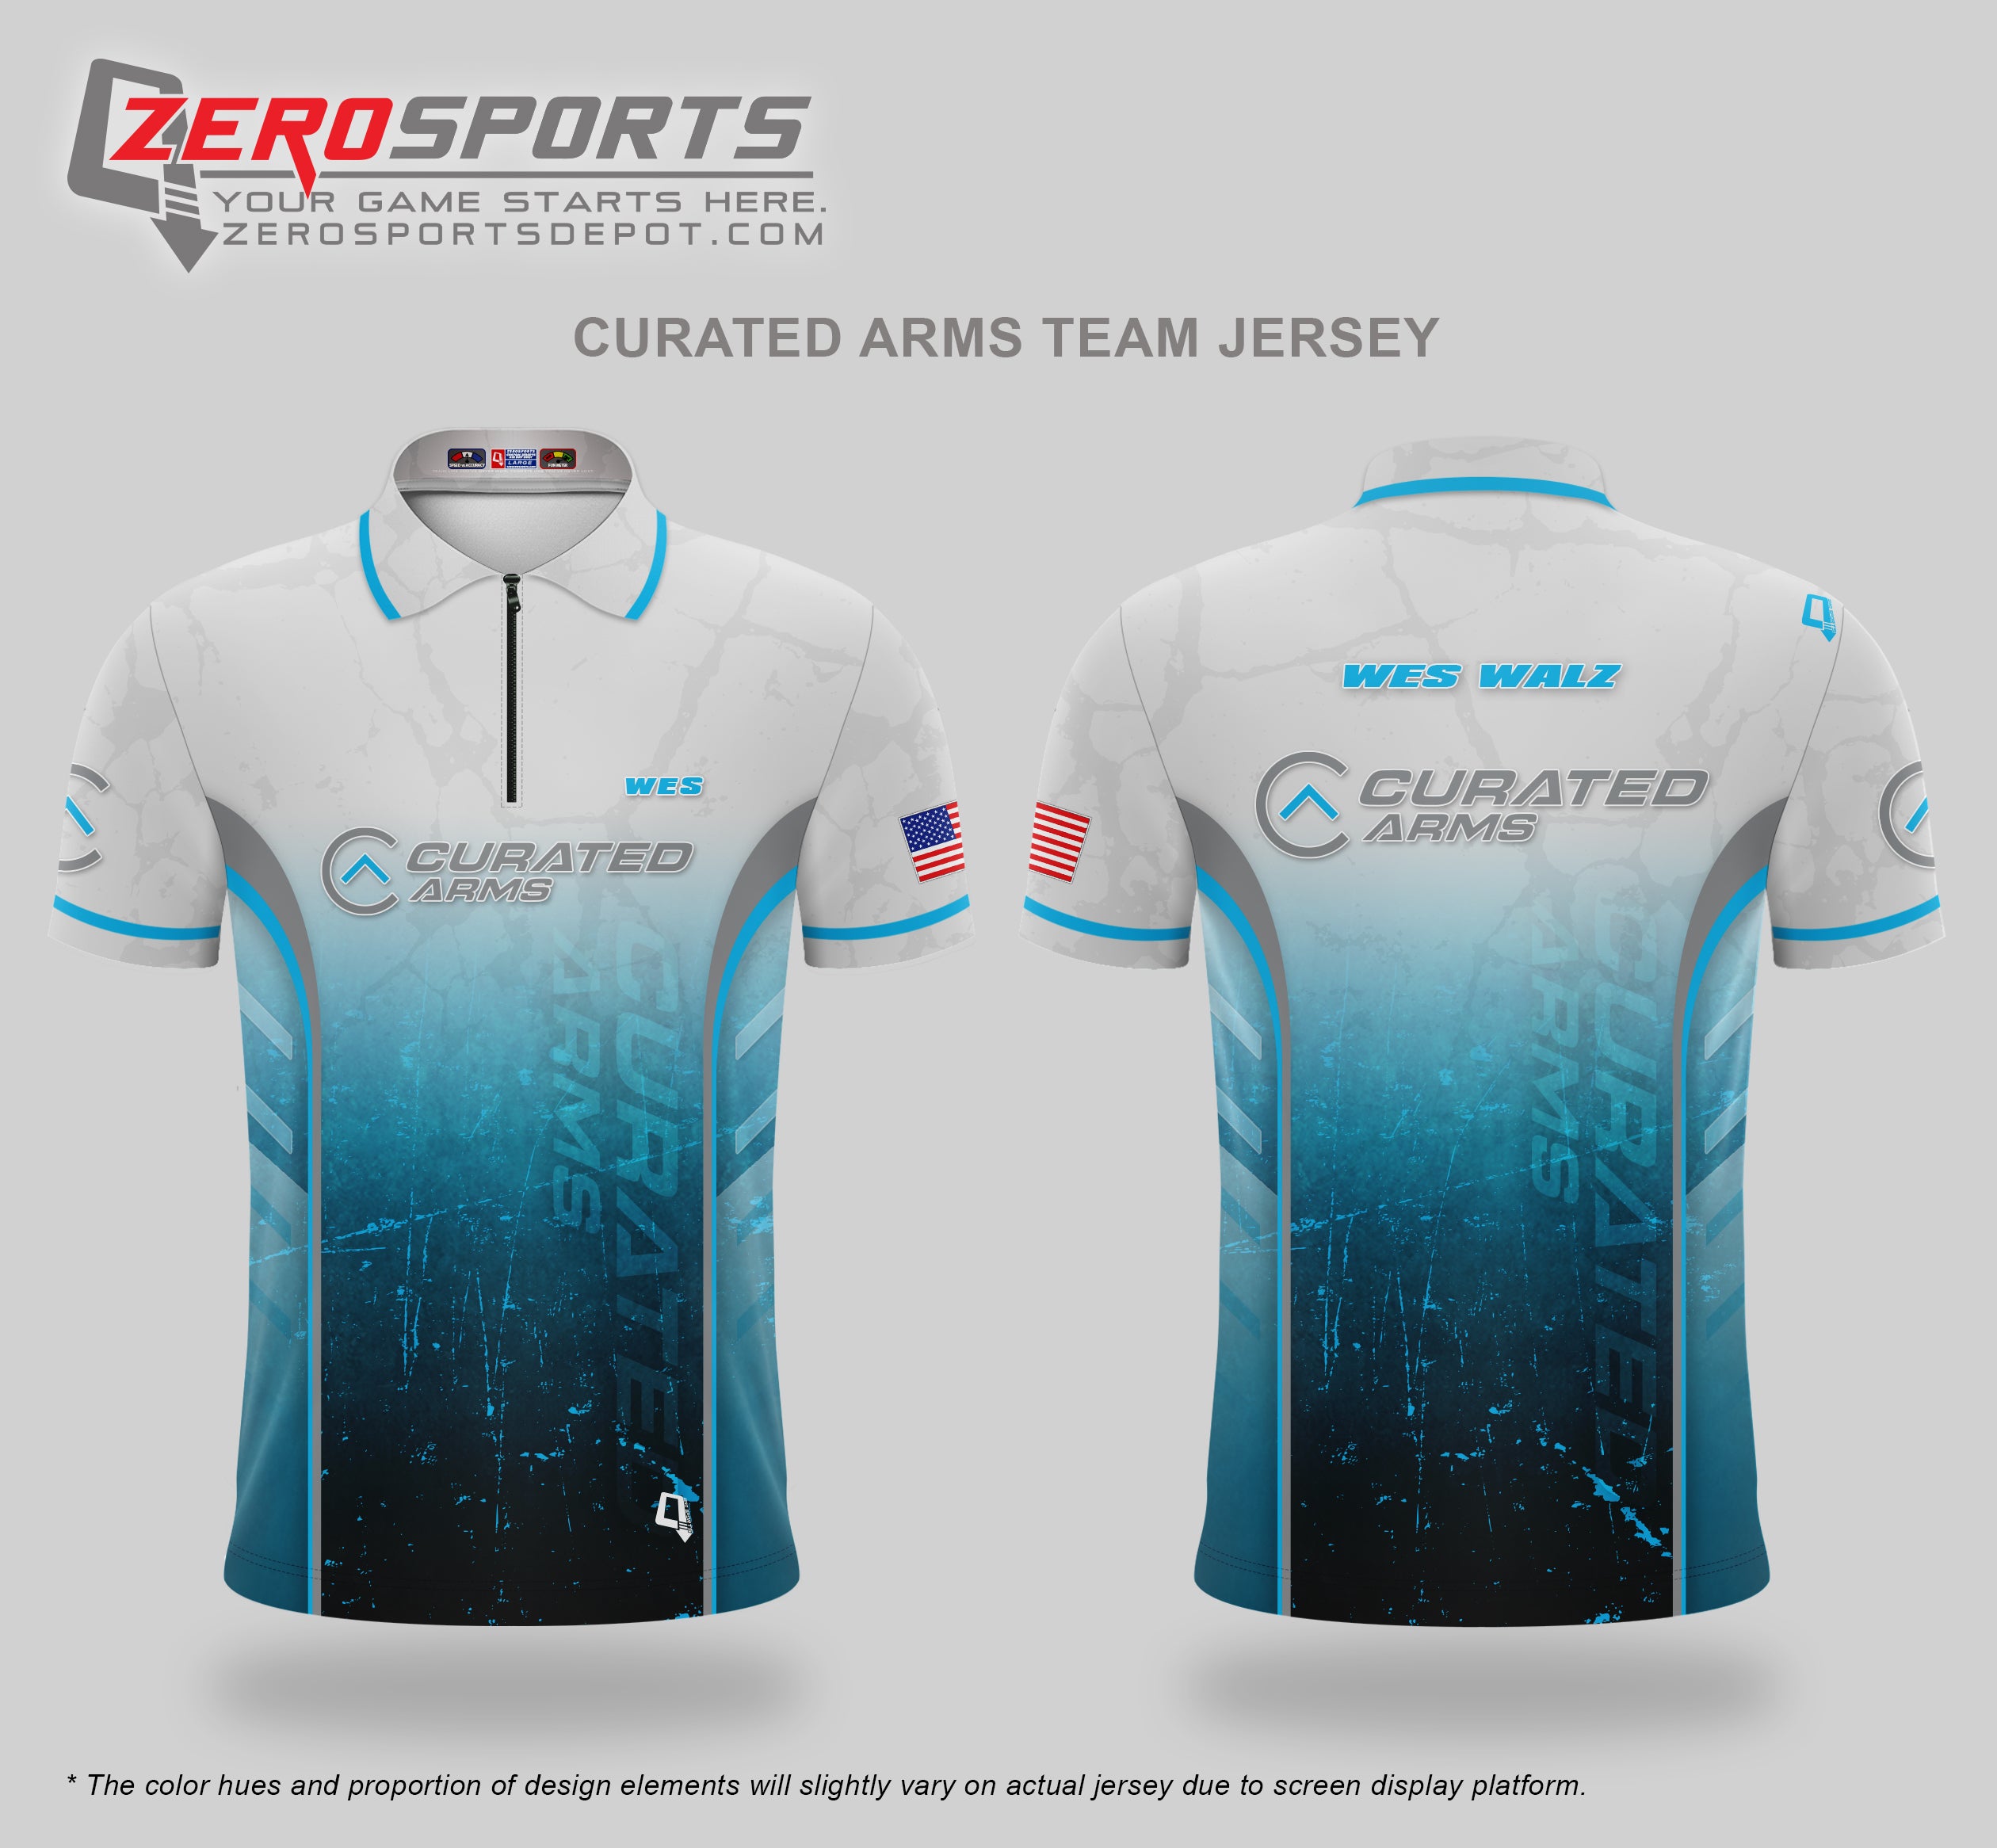 Curated Arms Team Jersey